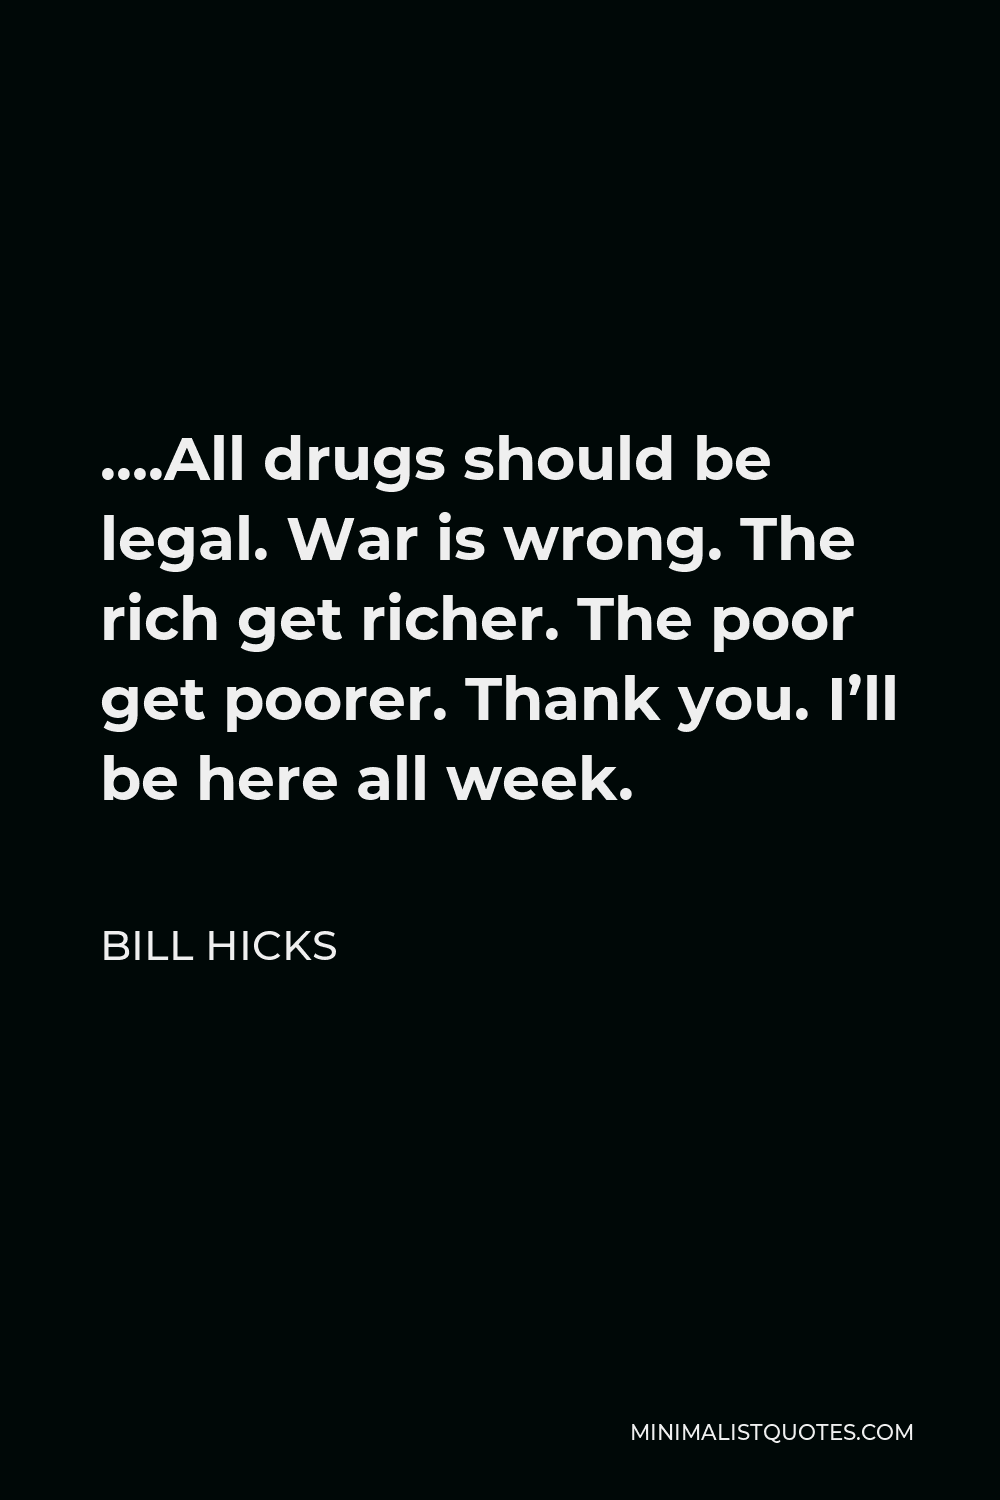 Bill Hicks Quote - ….All drugs should be legal. War is wrong. The rich get richer. The poor get poorer. Thank you. I’ll be here all week.